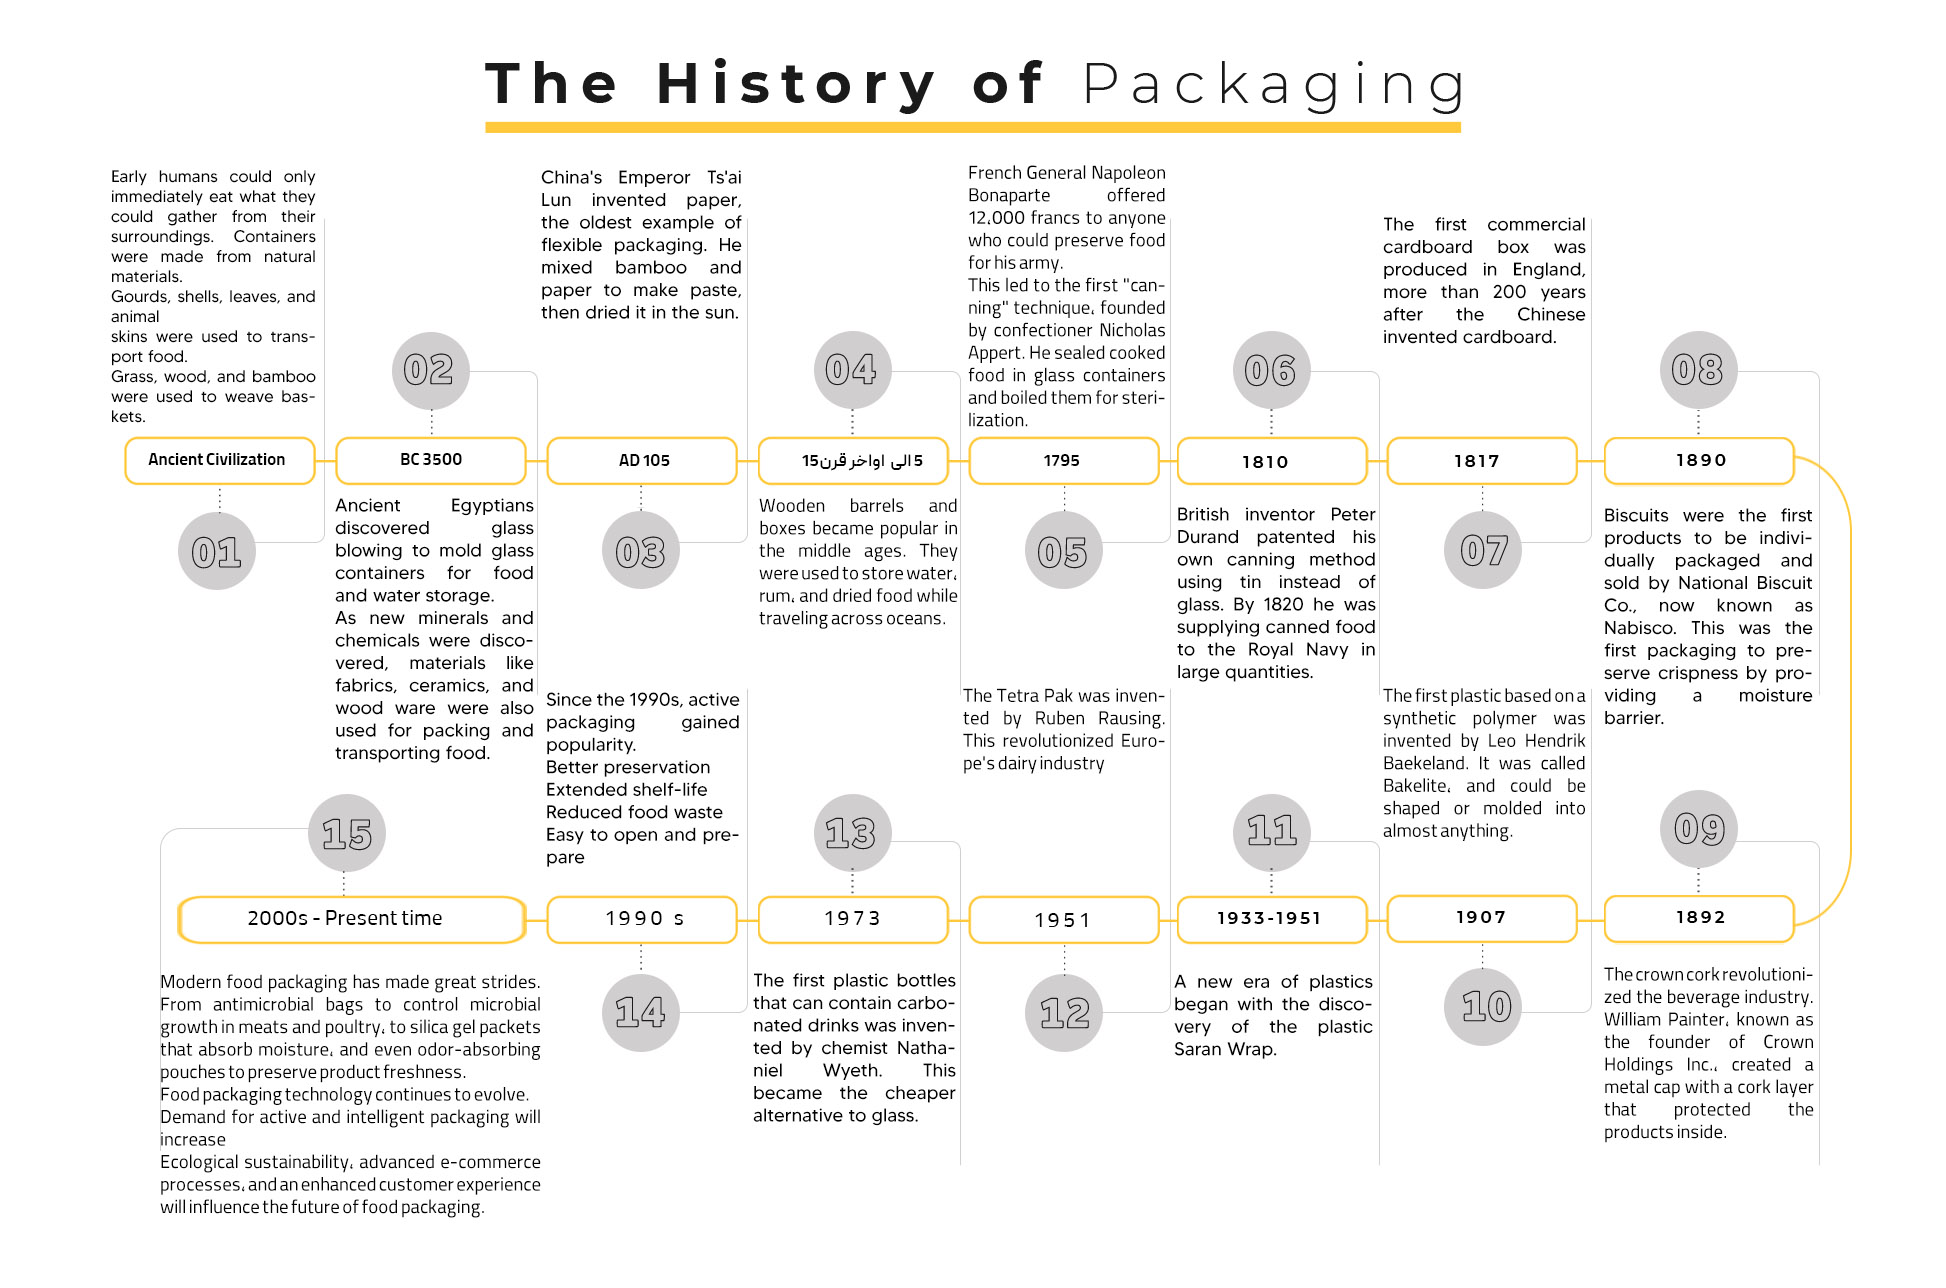 packing history